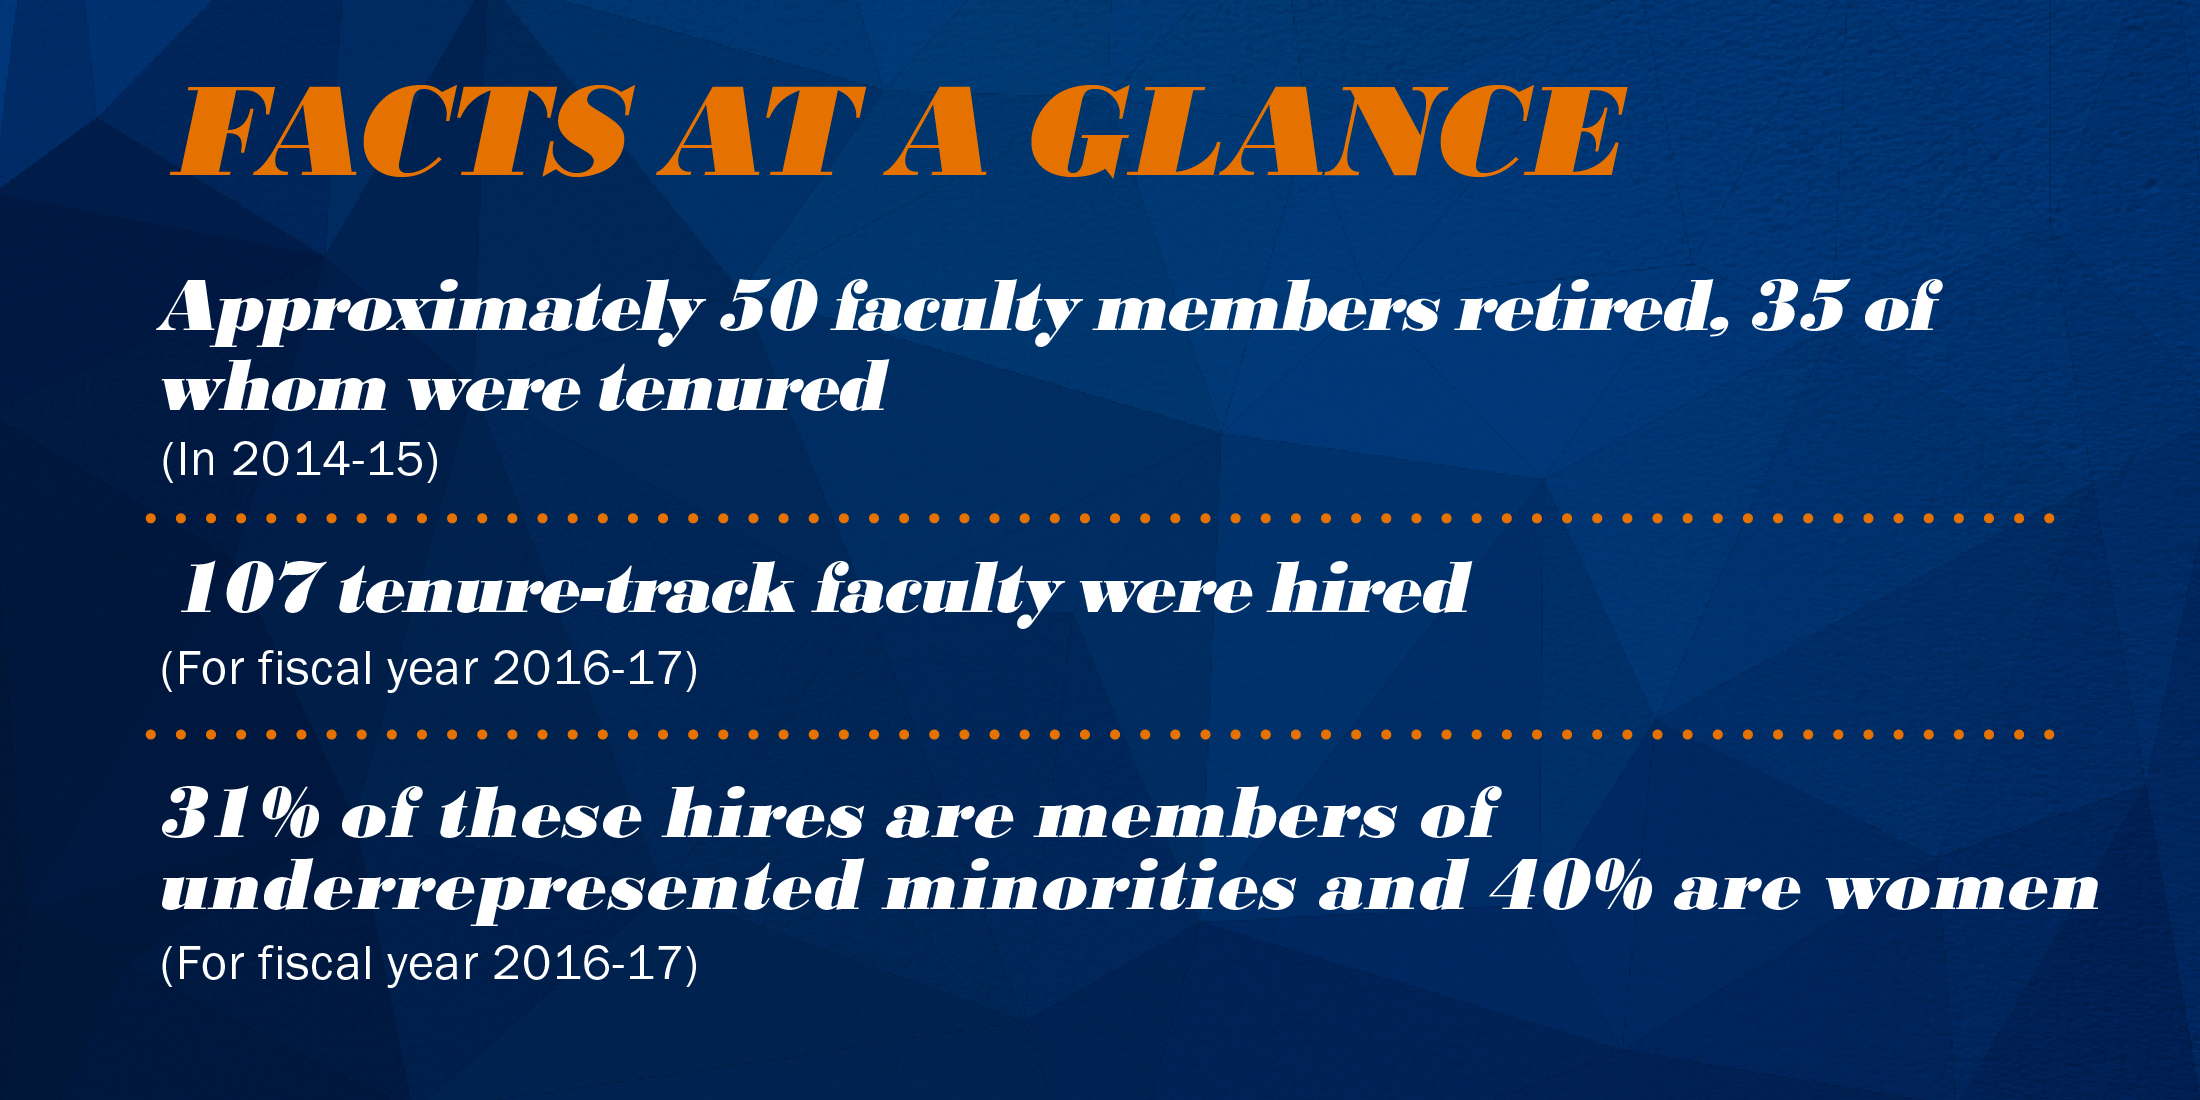 Text Reads: Facts at a Glance.  Approximately 50 faculty members retired, 35 of whom were tenured (in 2014-15). 107 tenure-track faculty were hired (For fiscal year 2016-17). 31% of these hires are members of underrepresented minorities and 40% are women (for fiscal year 2016-17)